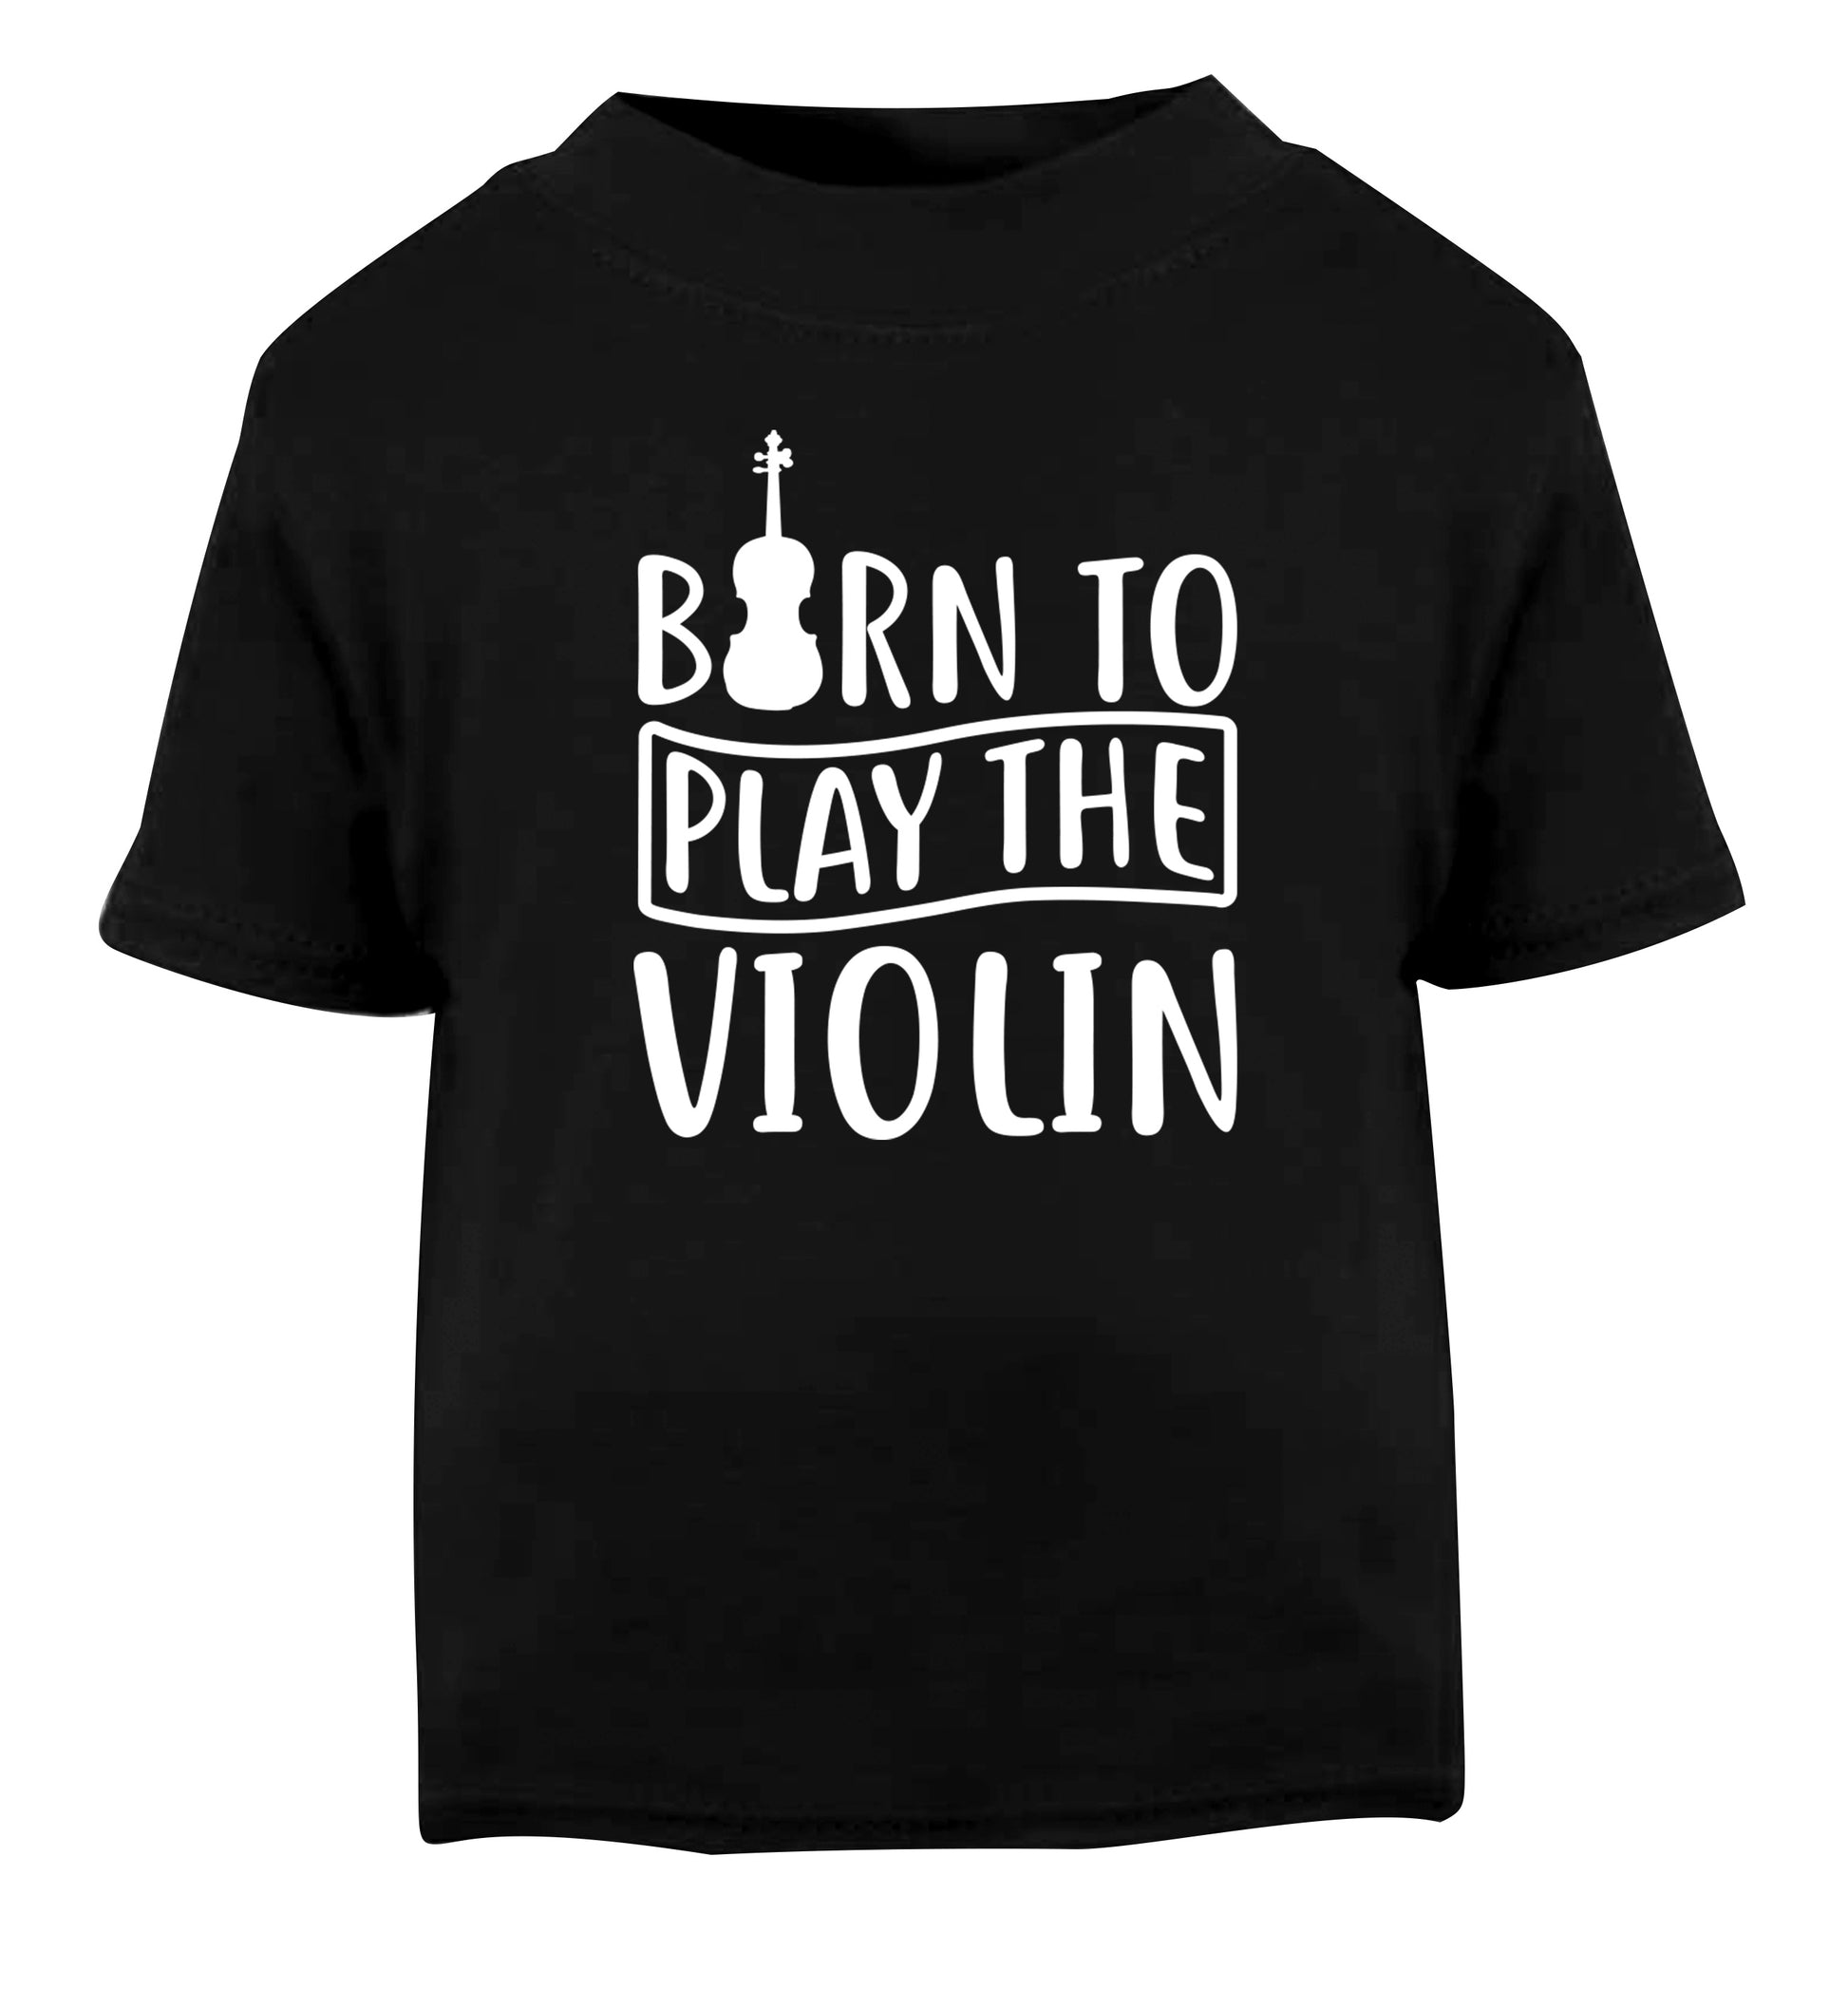 Born to Play the Violin Black Baby Toddler Tshirt 2 years